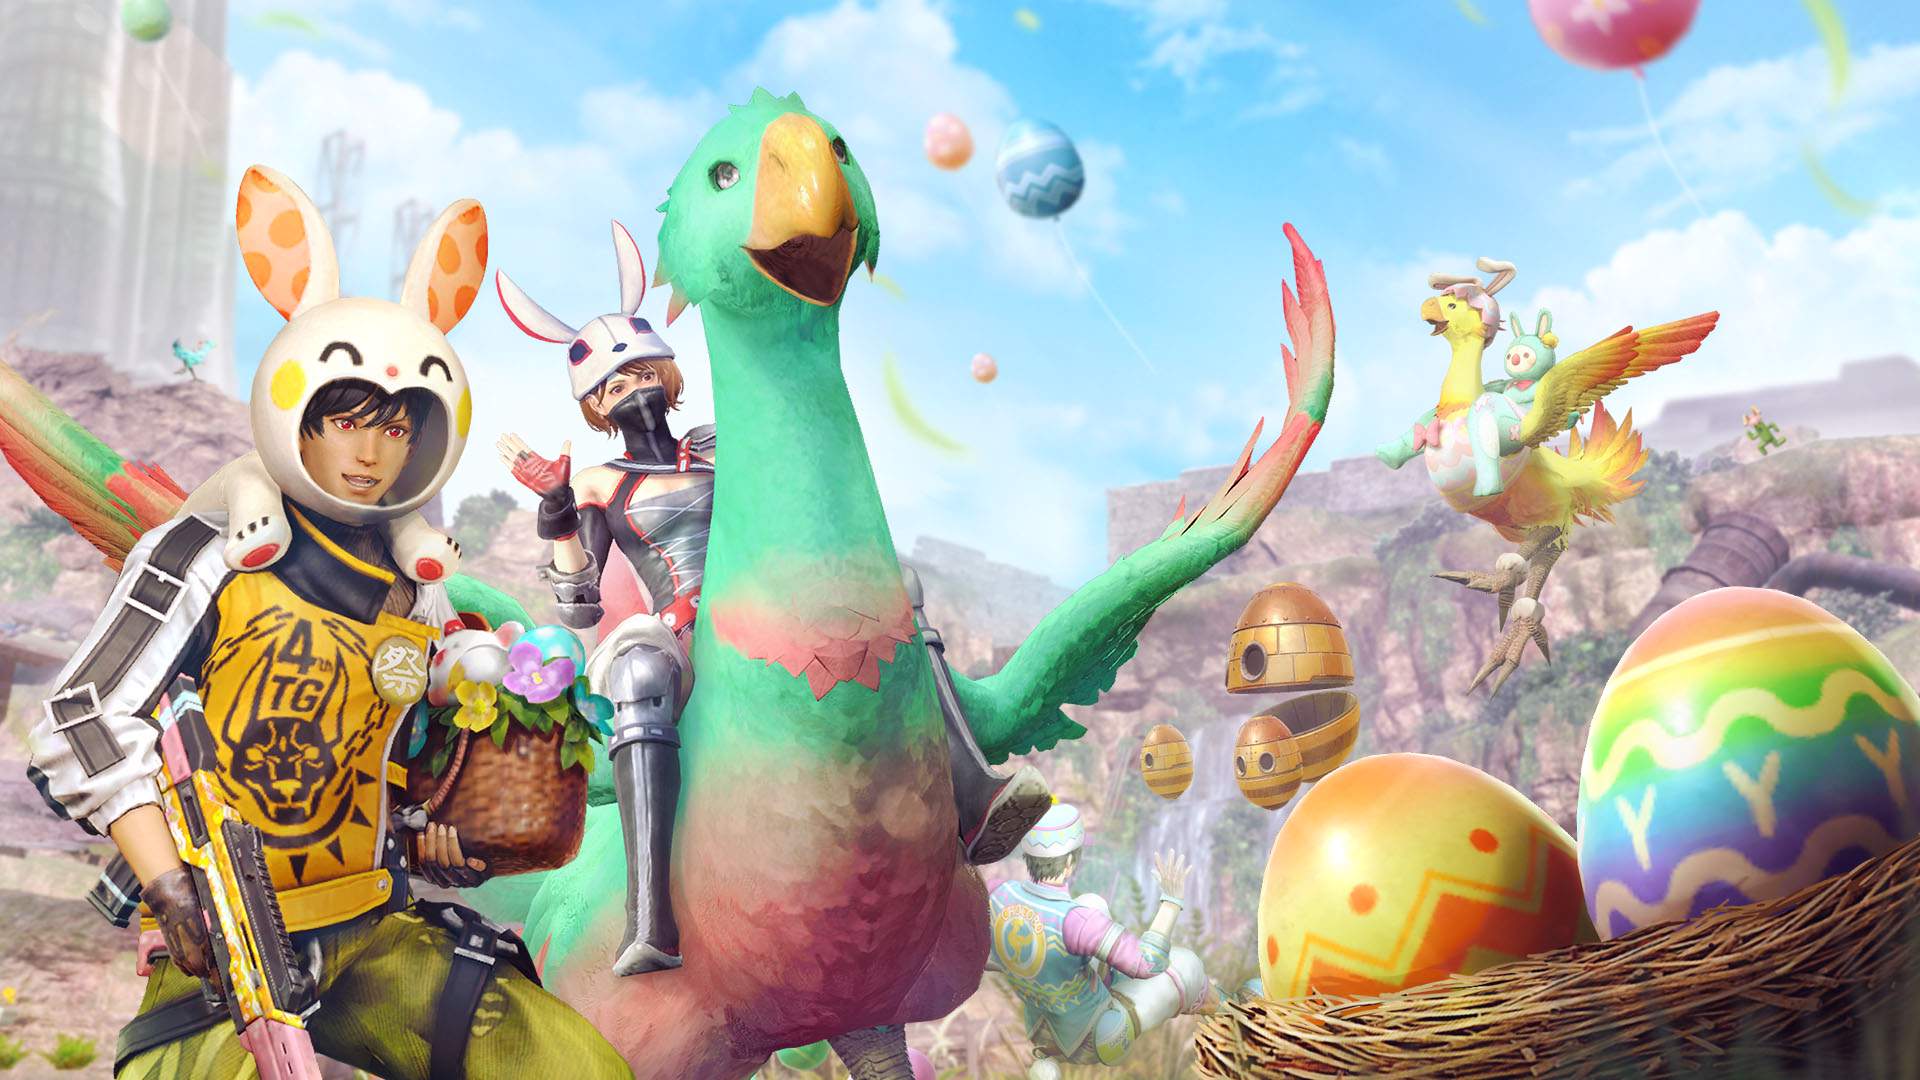 Colorful Chocobos and SOLDIER candidates appear to celebrate the Egg Hunt.